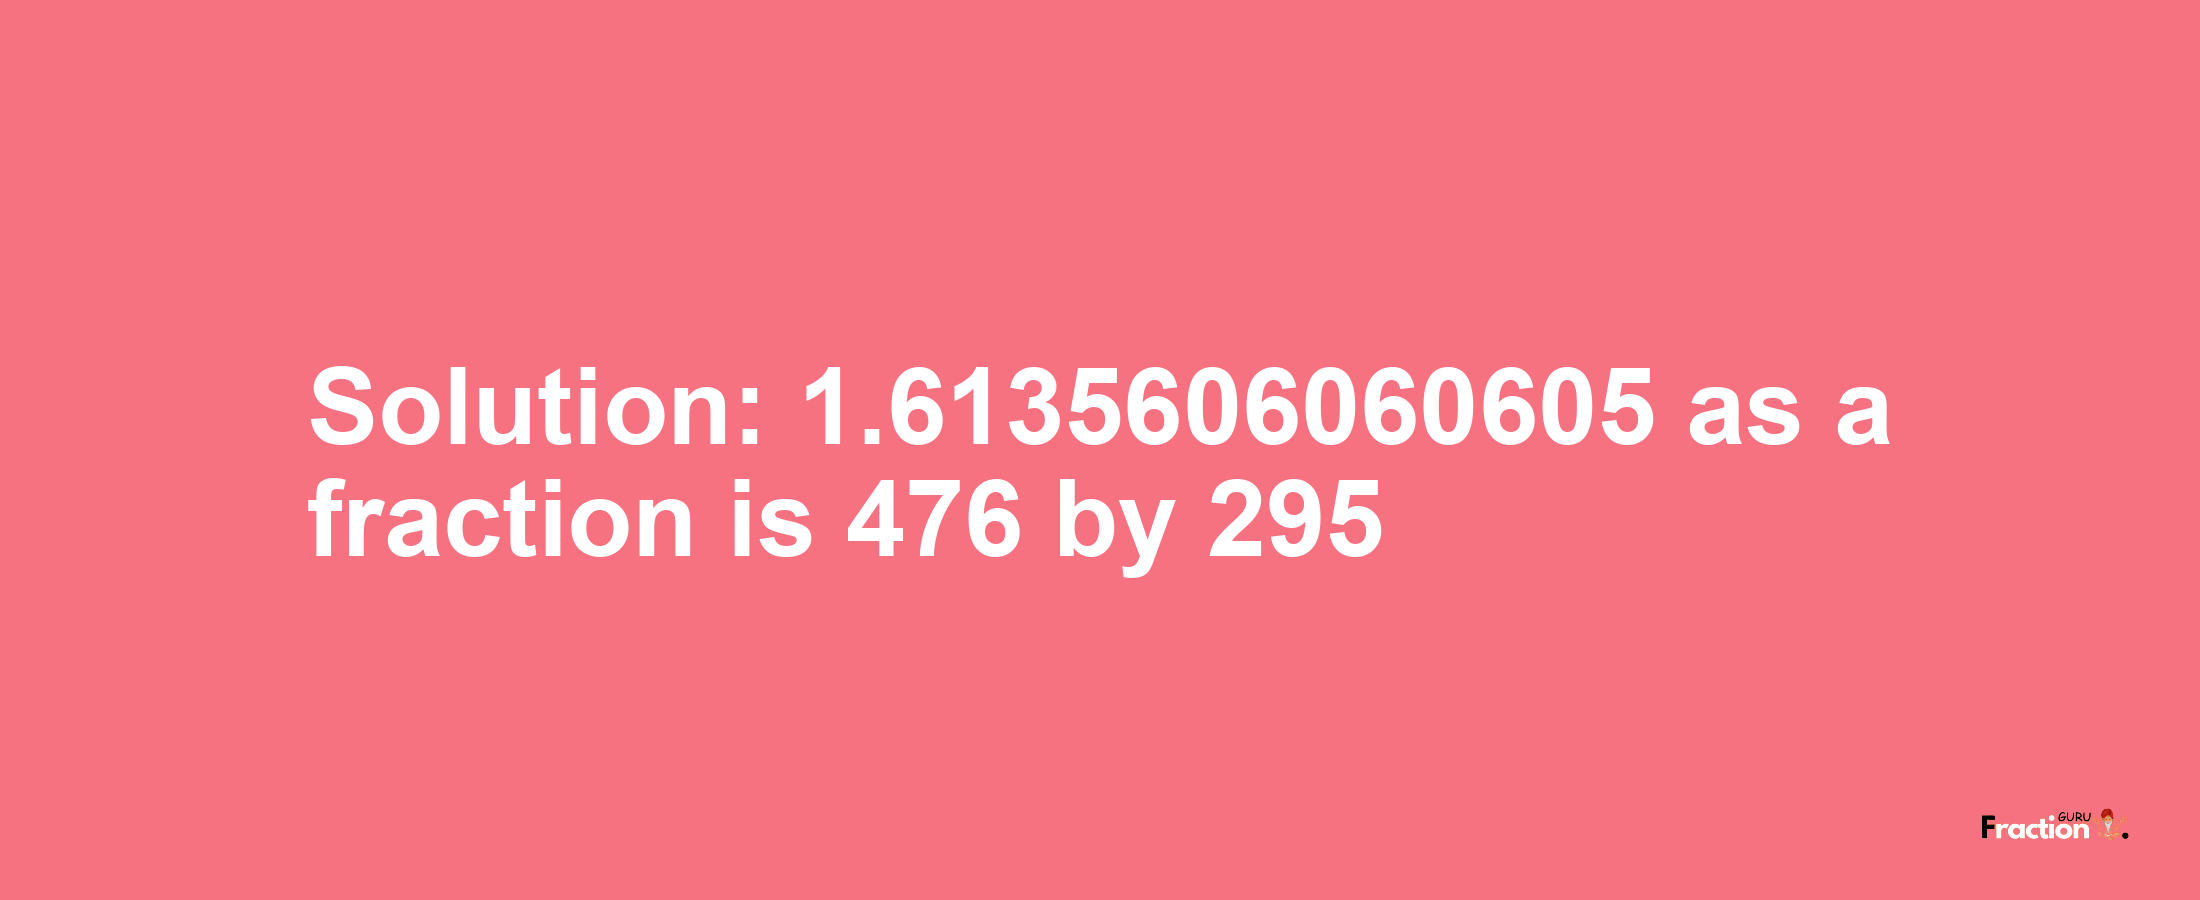 Solution:1.6135606060605 as a fraction is 476/295